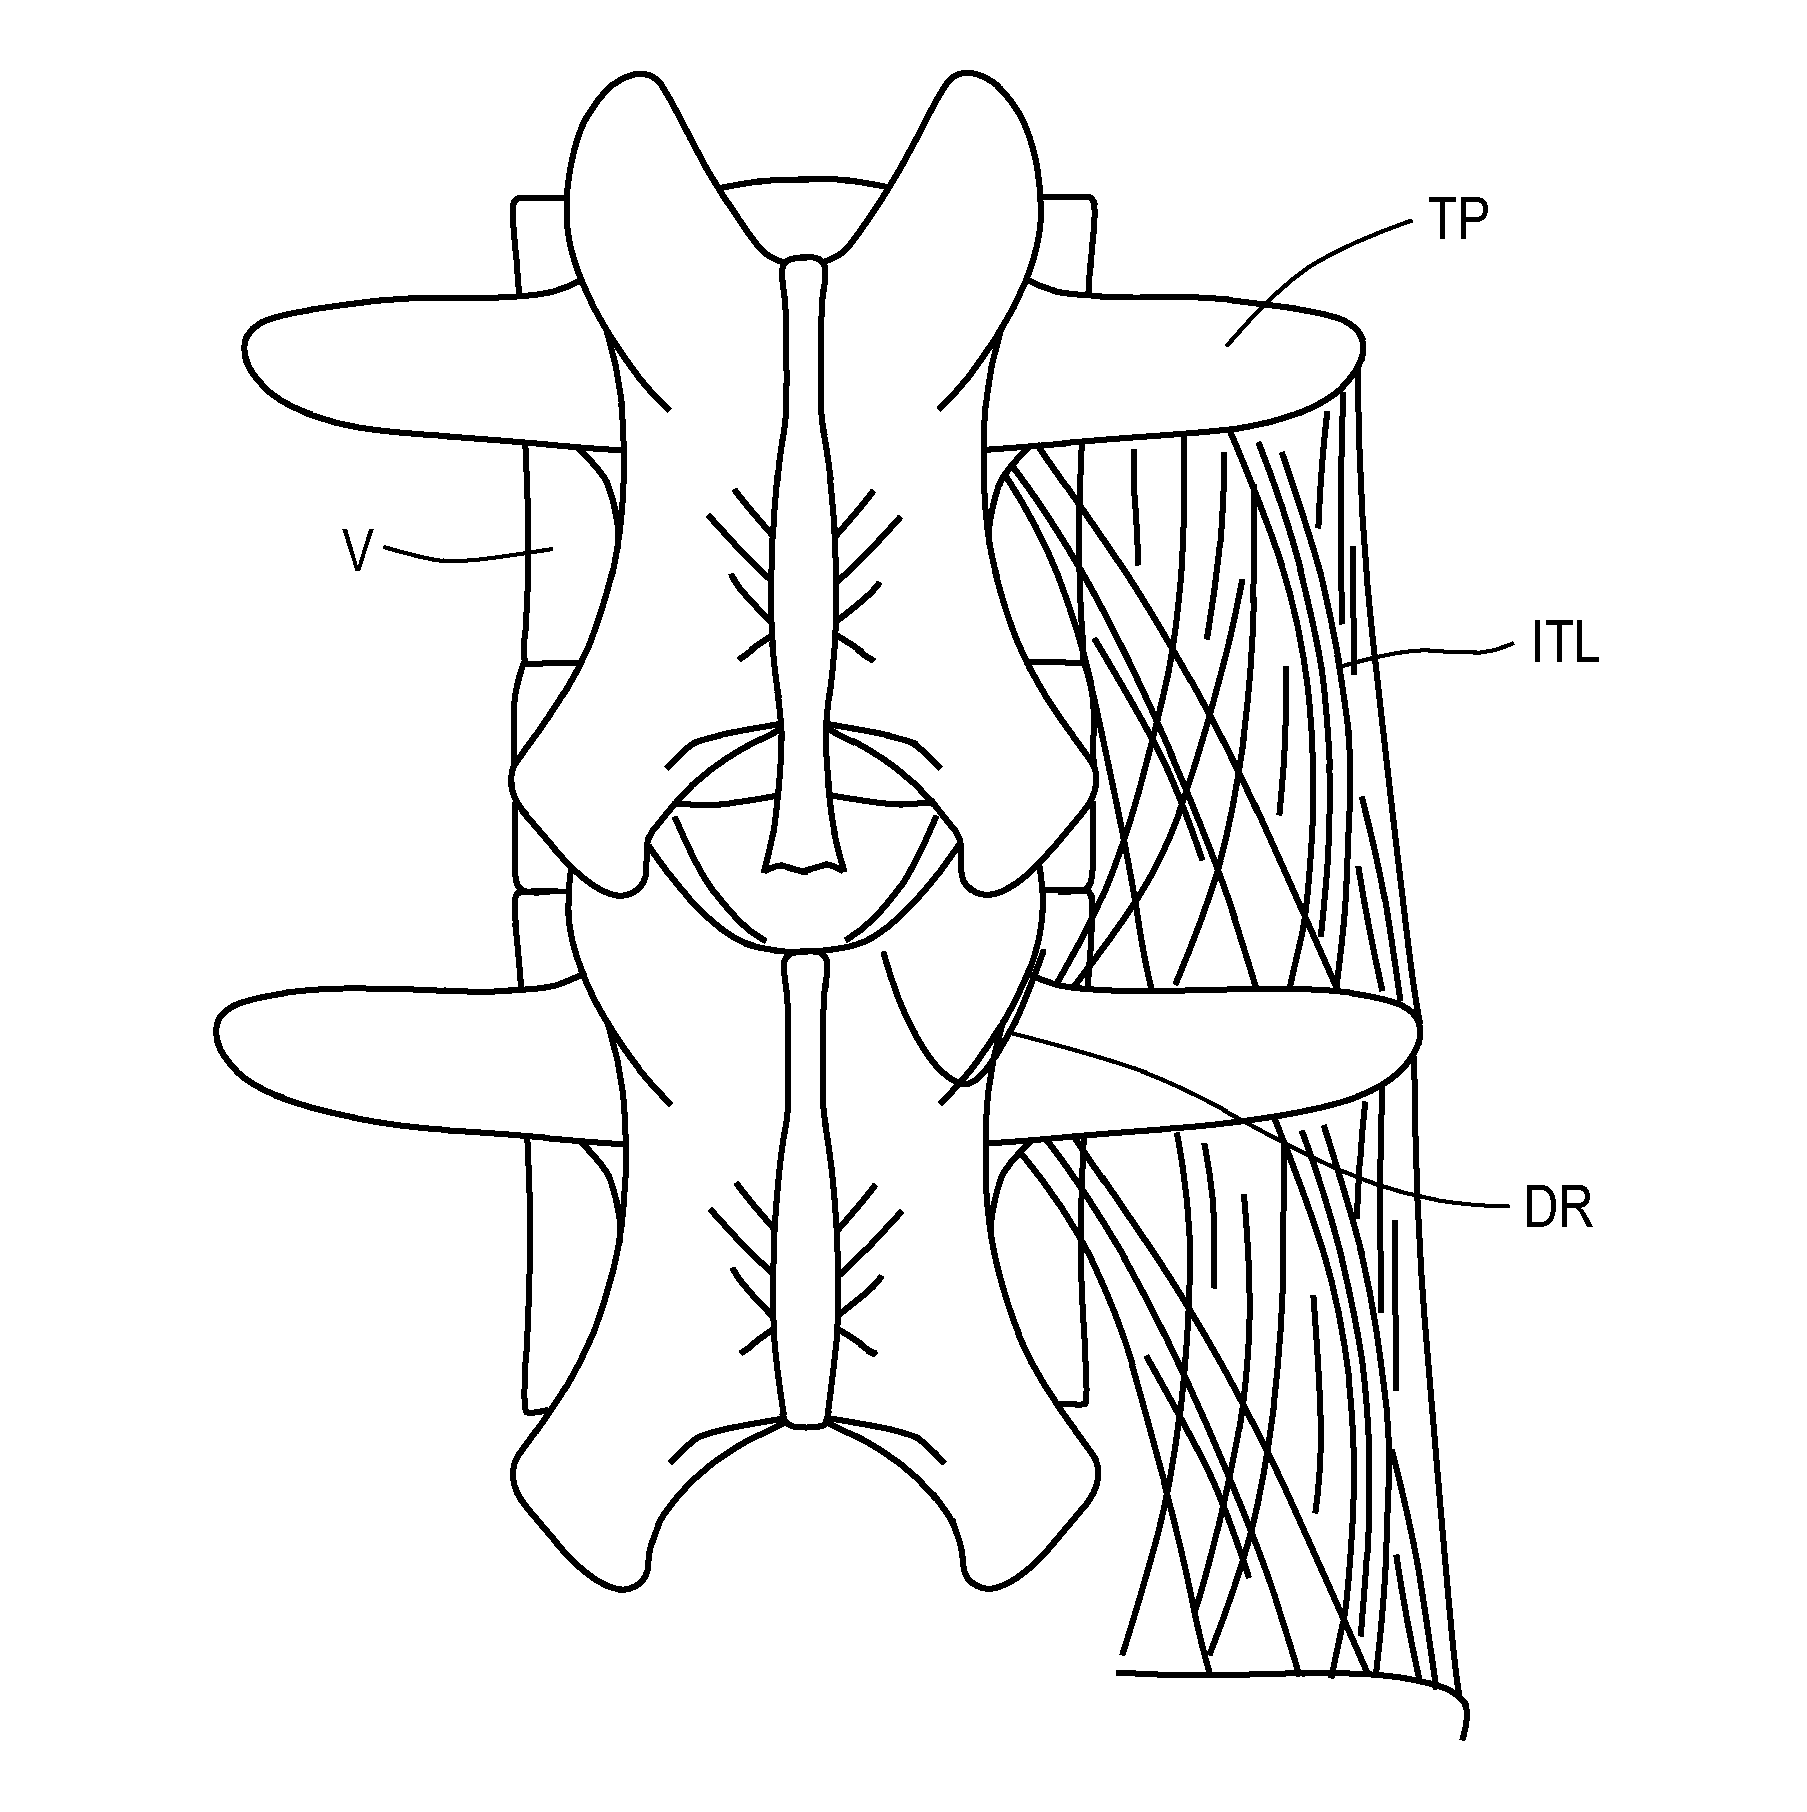 Apparatus and methods for anchoring electrode leads adjacent to nervous tissue